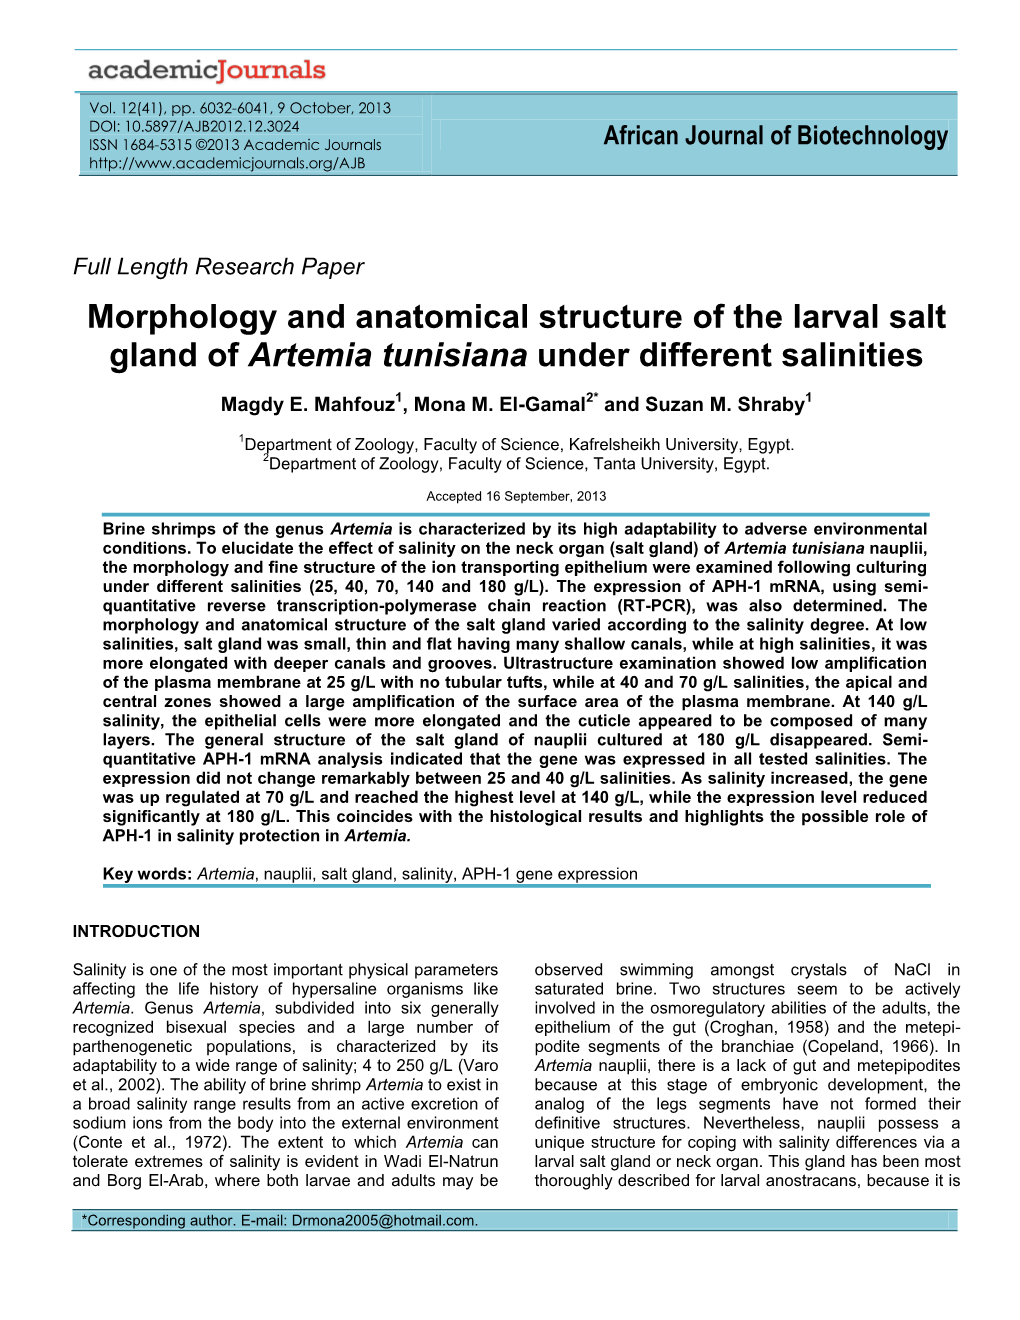 Morphology and Anatomical Structure of the Larval Salt Gland of Artemia Tunisiana Under Different Salinities